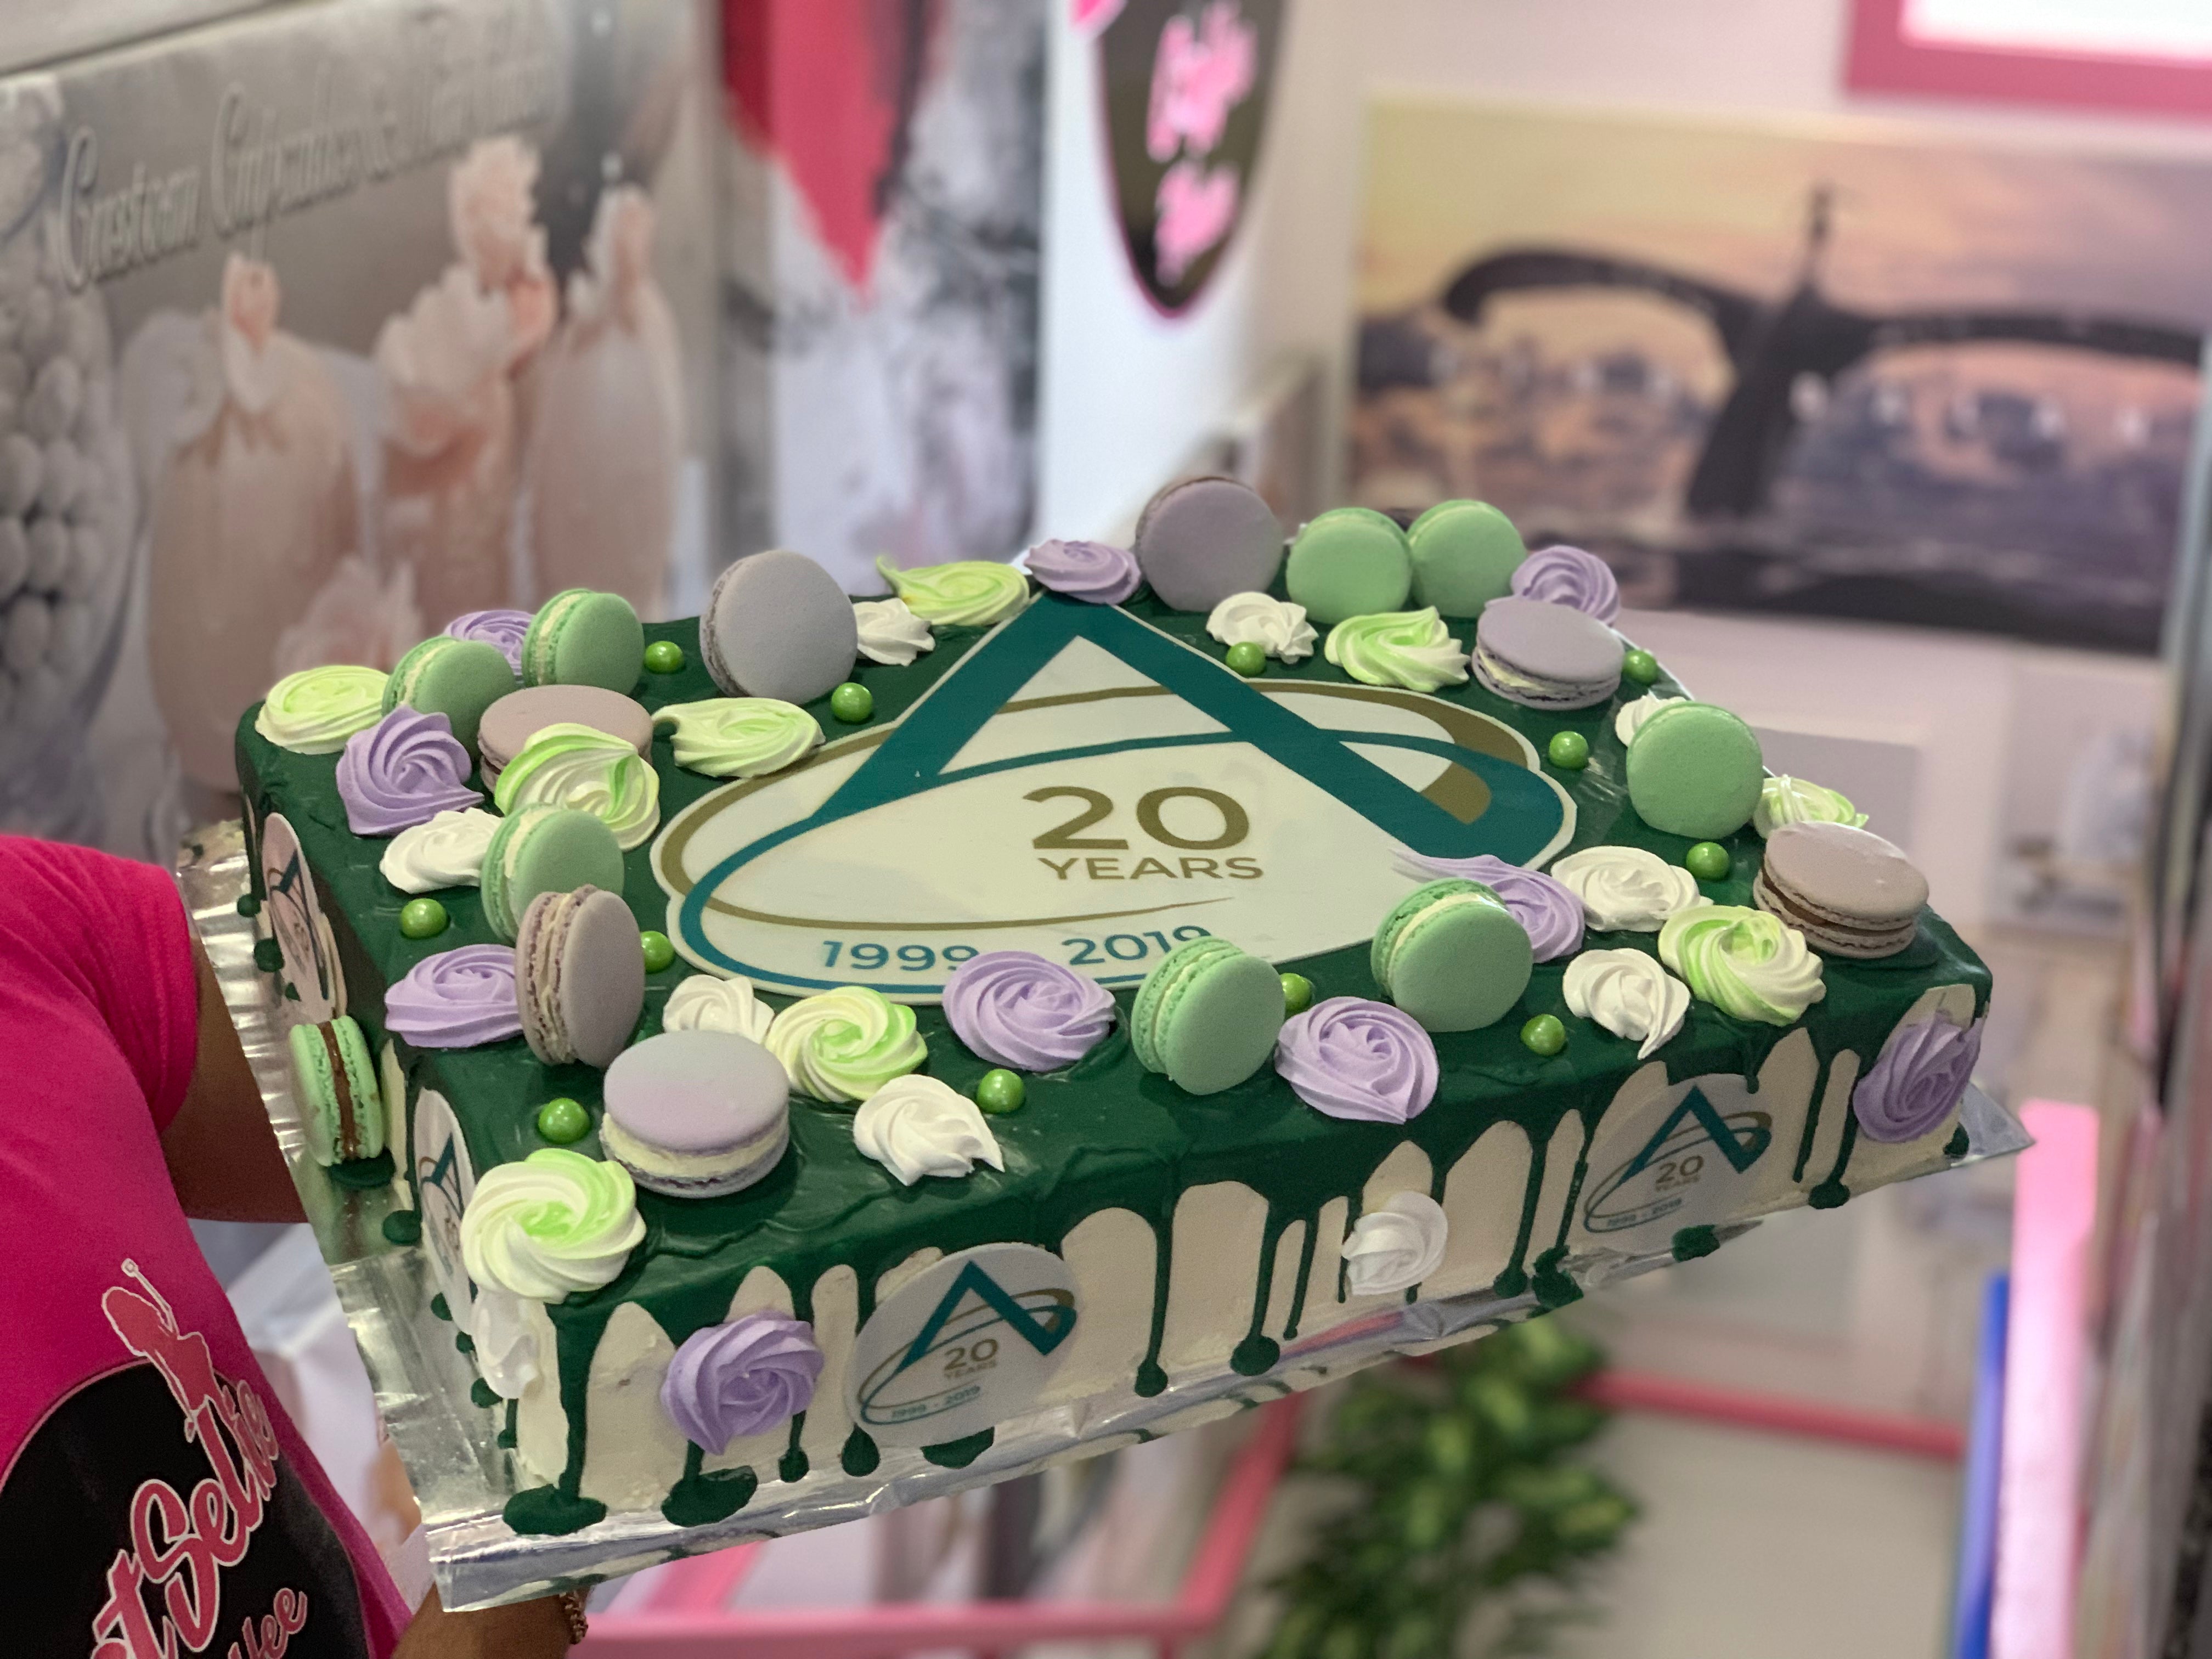 Avanade20Years: A cake worthy of 20 years, baked by one of our own | Avanade